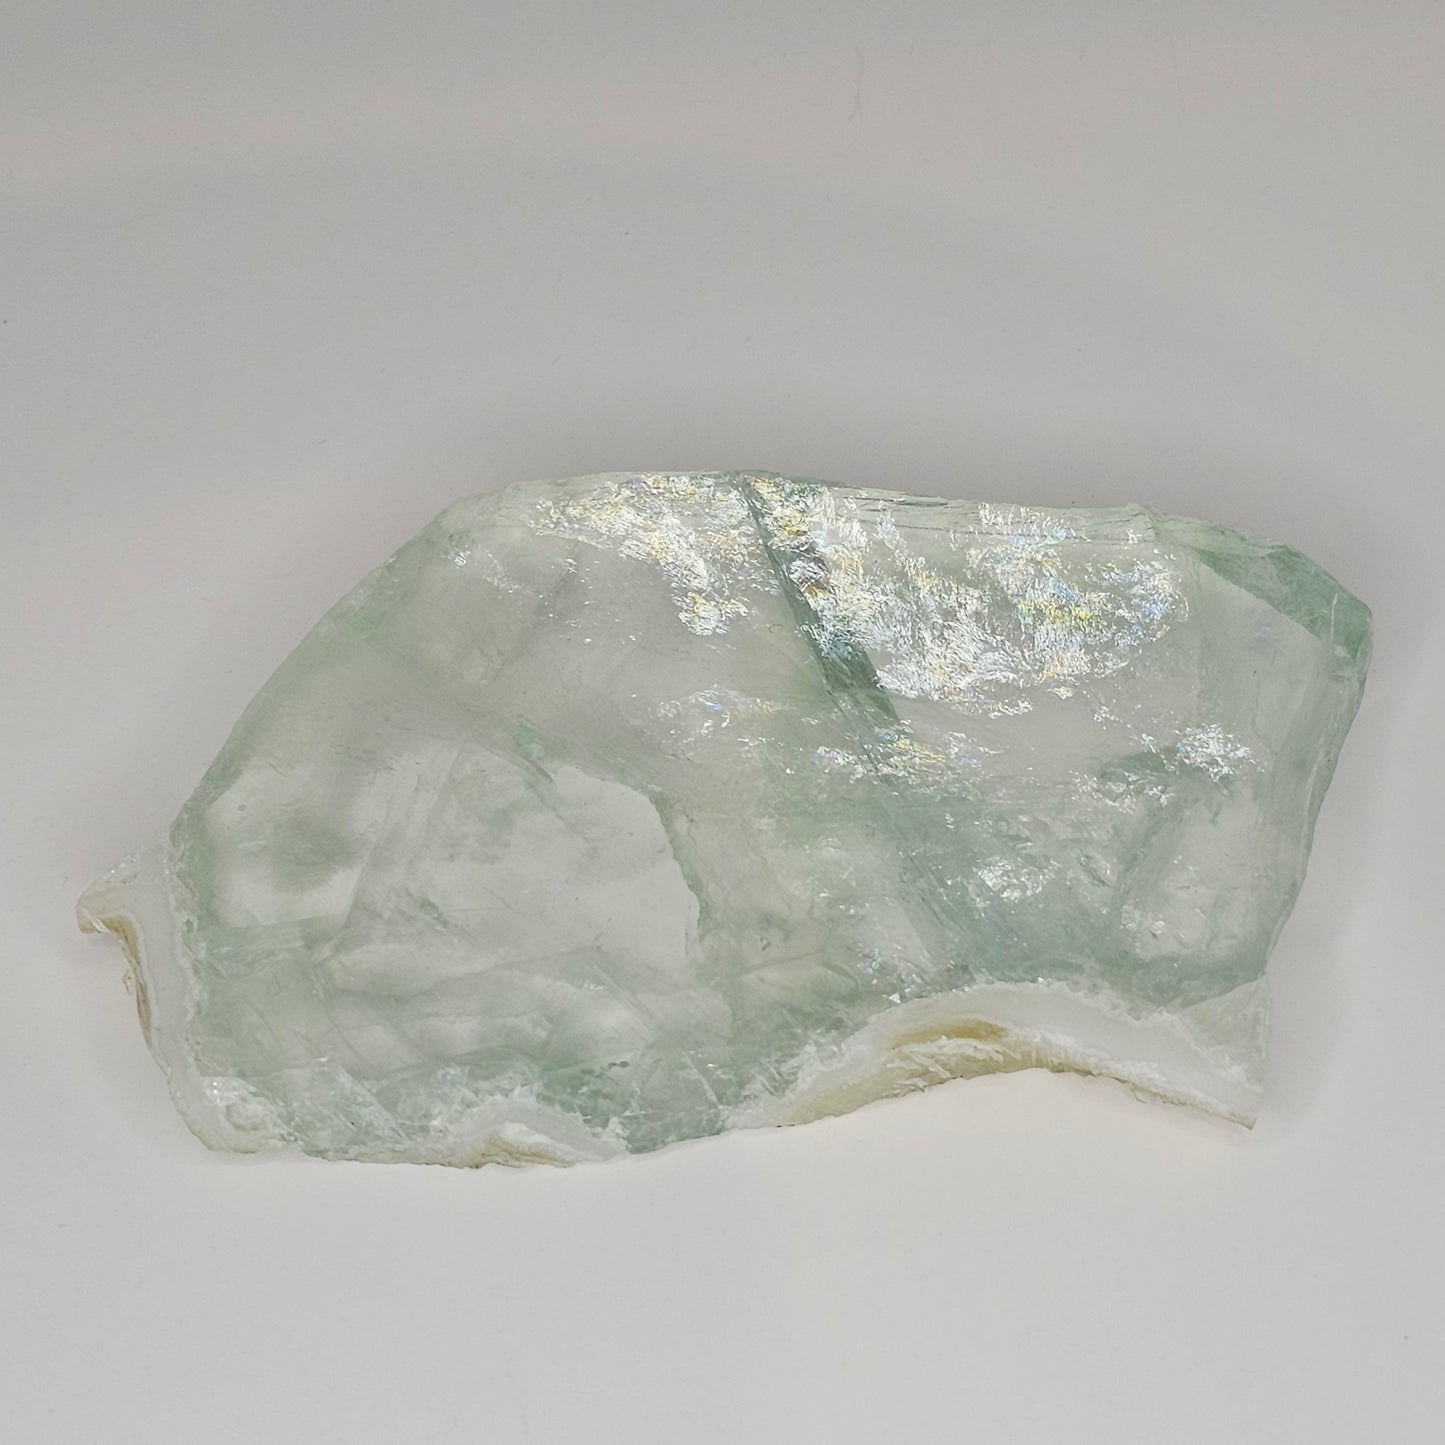 Stunning transparent Green Fluorite slab overflowing with gorgeous rainbows within.